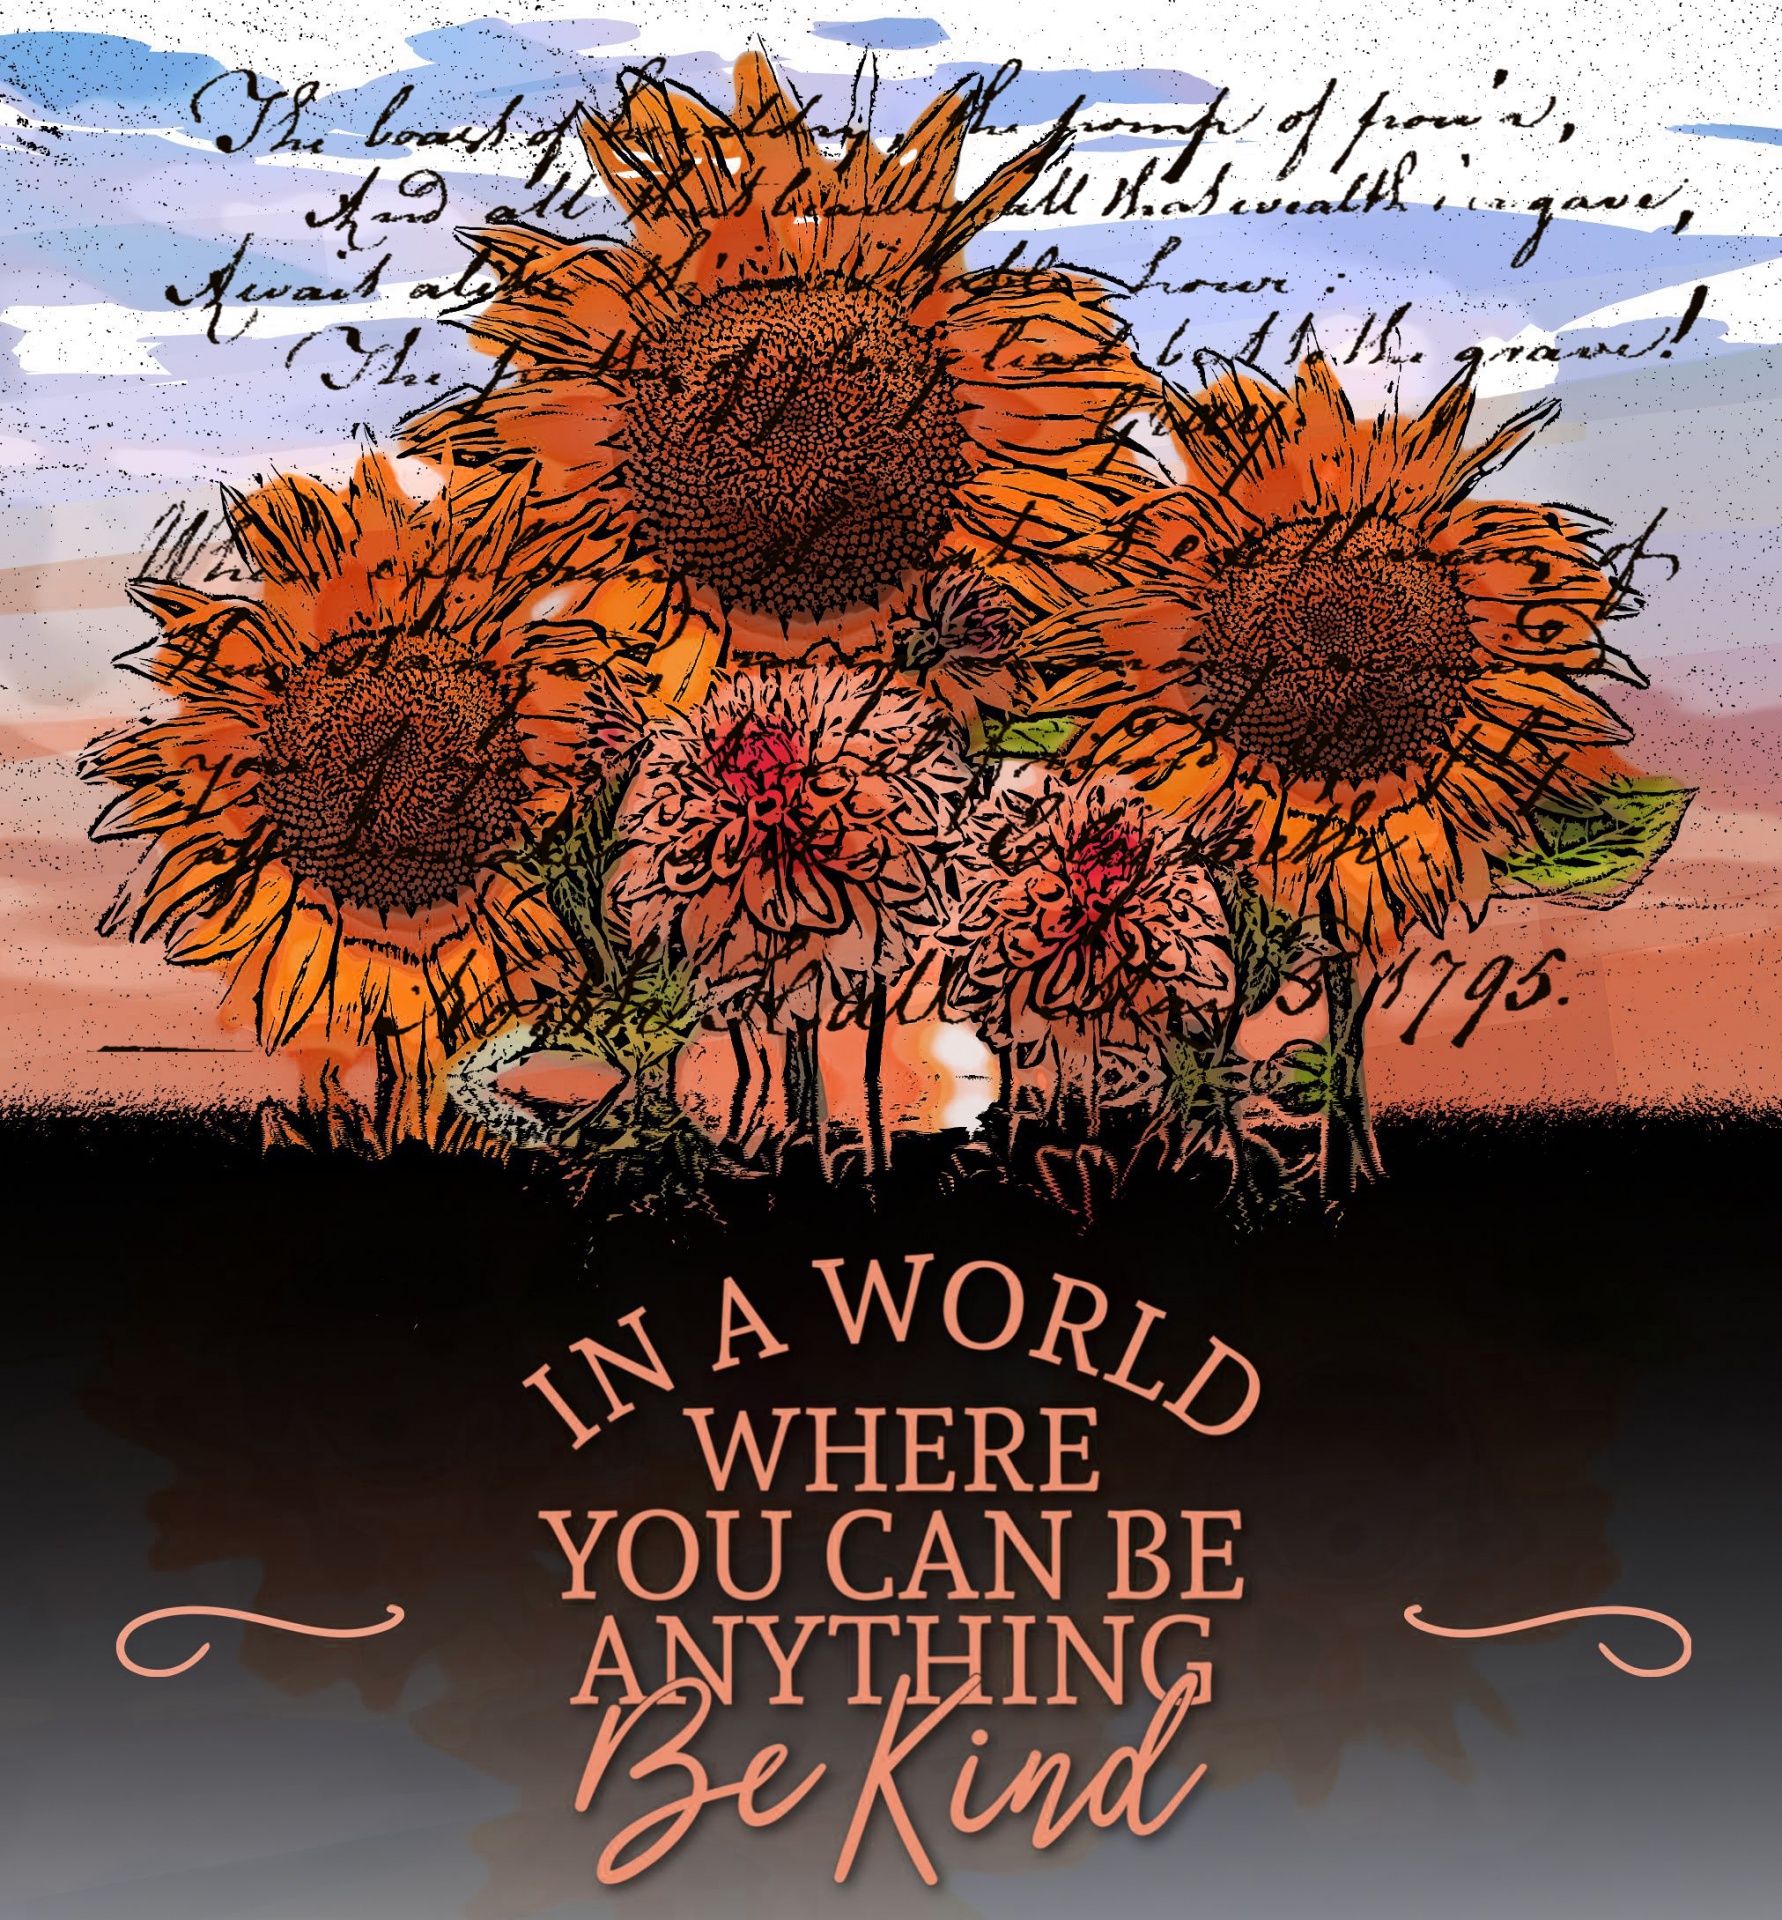 sunflower themed poster with quote about being kind